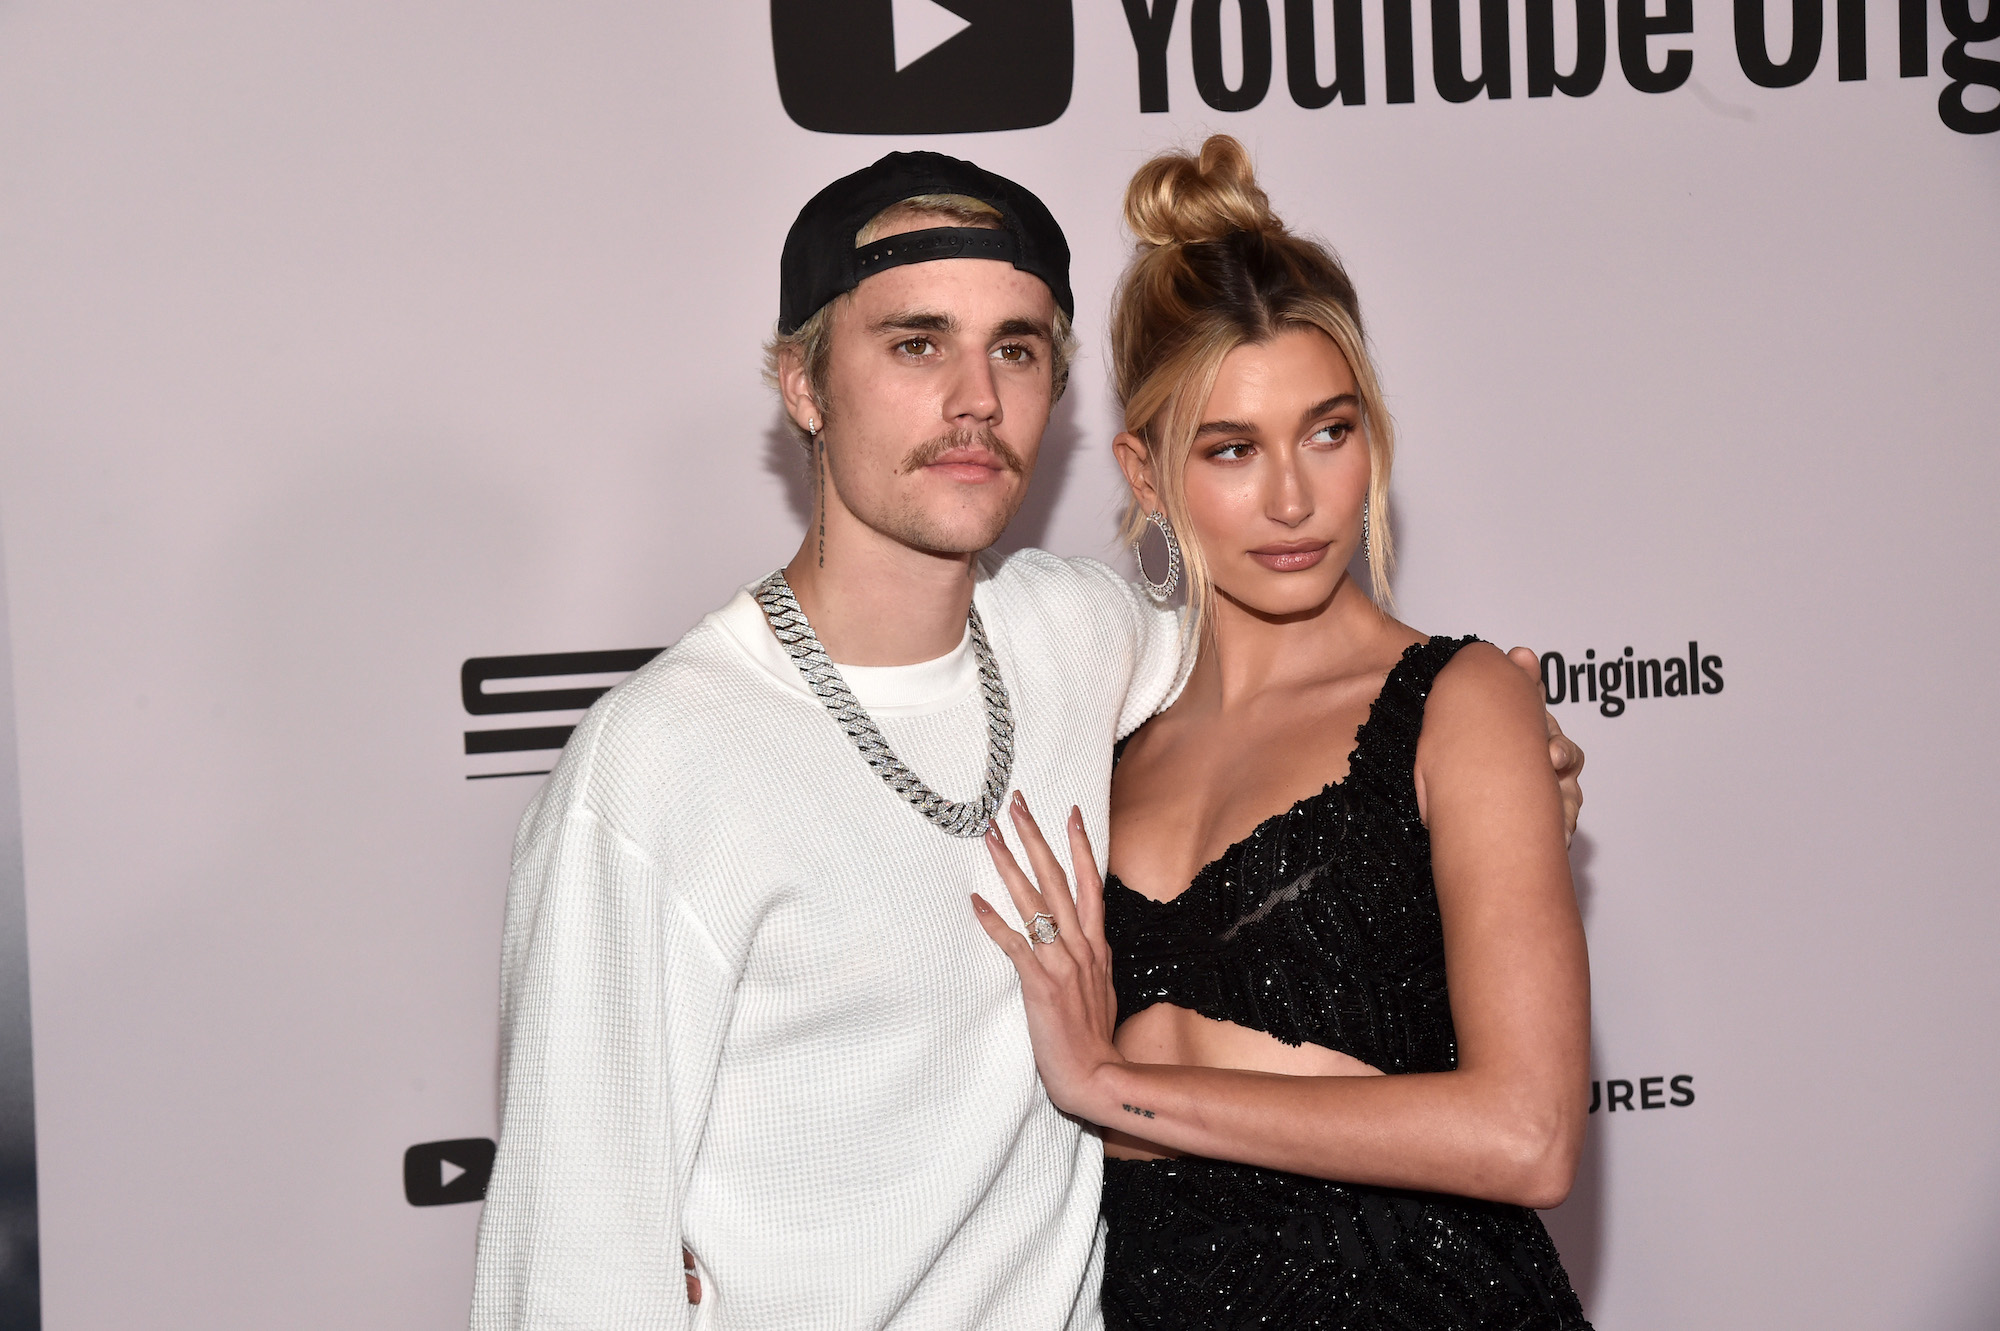 (L-R) Justin Bieber and Hailey Bieber smiling in front of a pink background